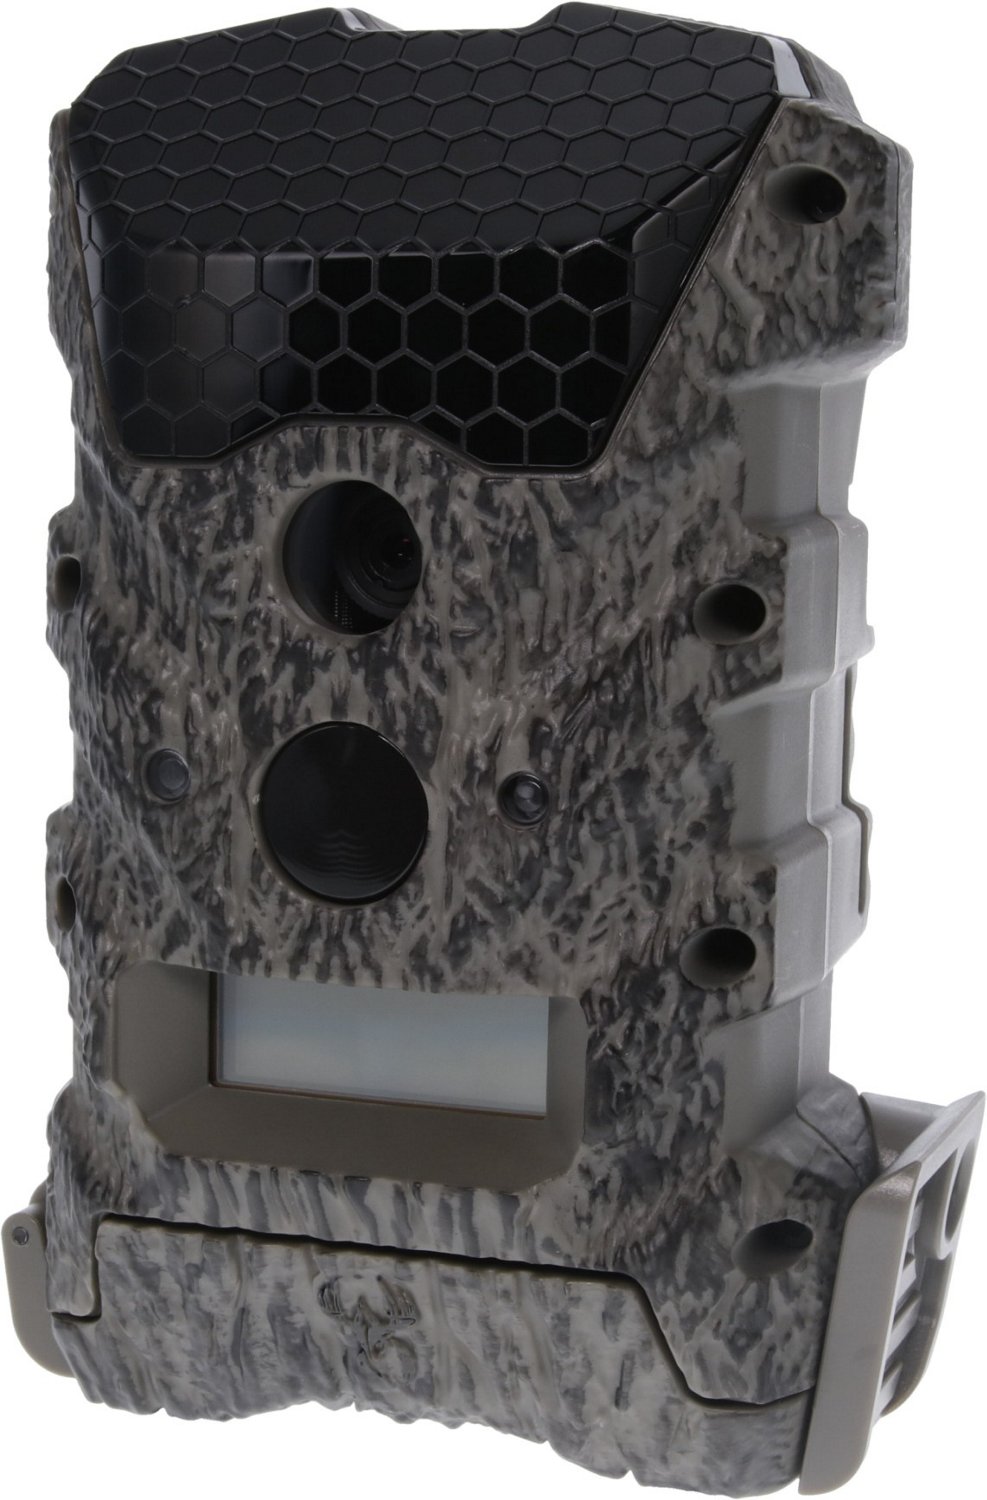 Wildgame Innovations Mirage Pro Lights Out 32 MP Game Camera 